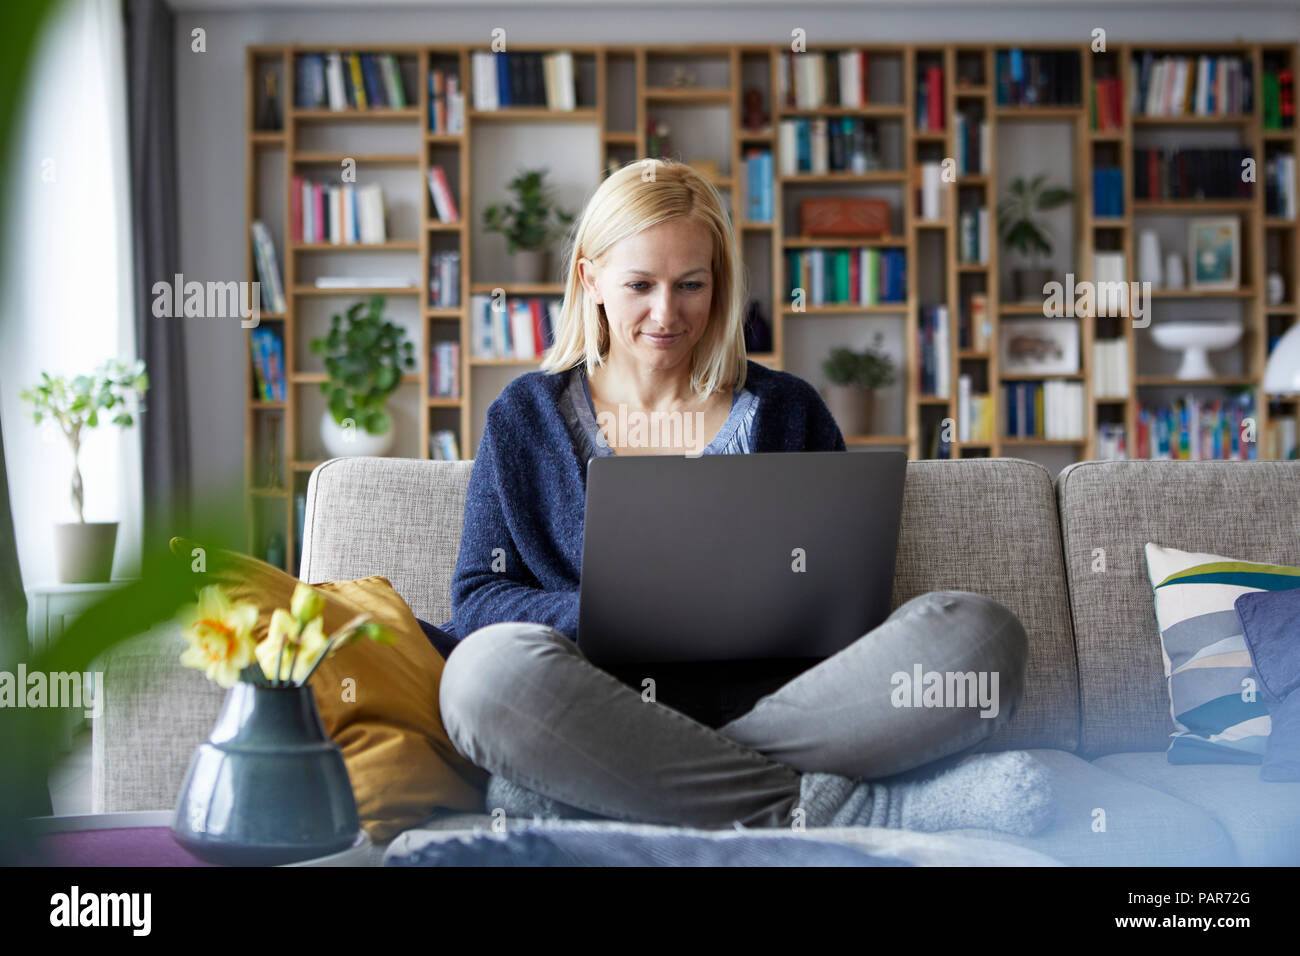 Woman at home sitting on couch using laptop Stock Photo